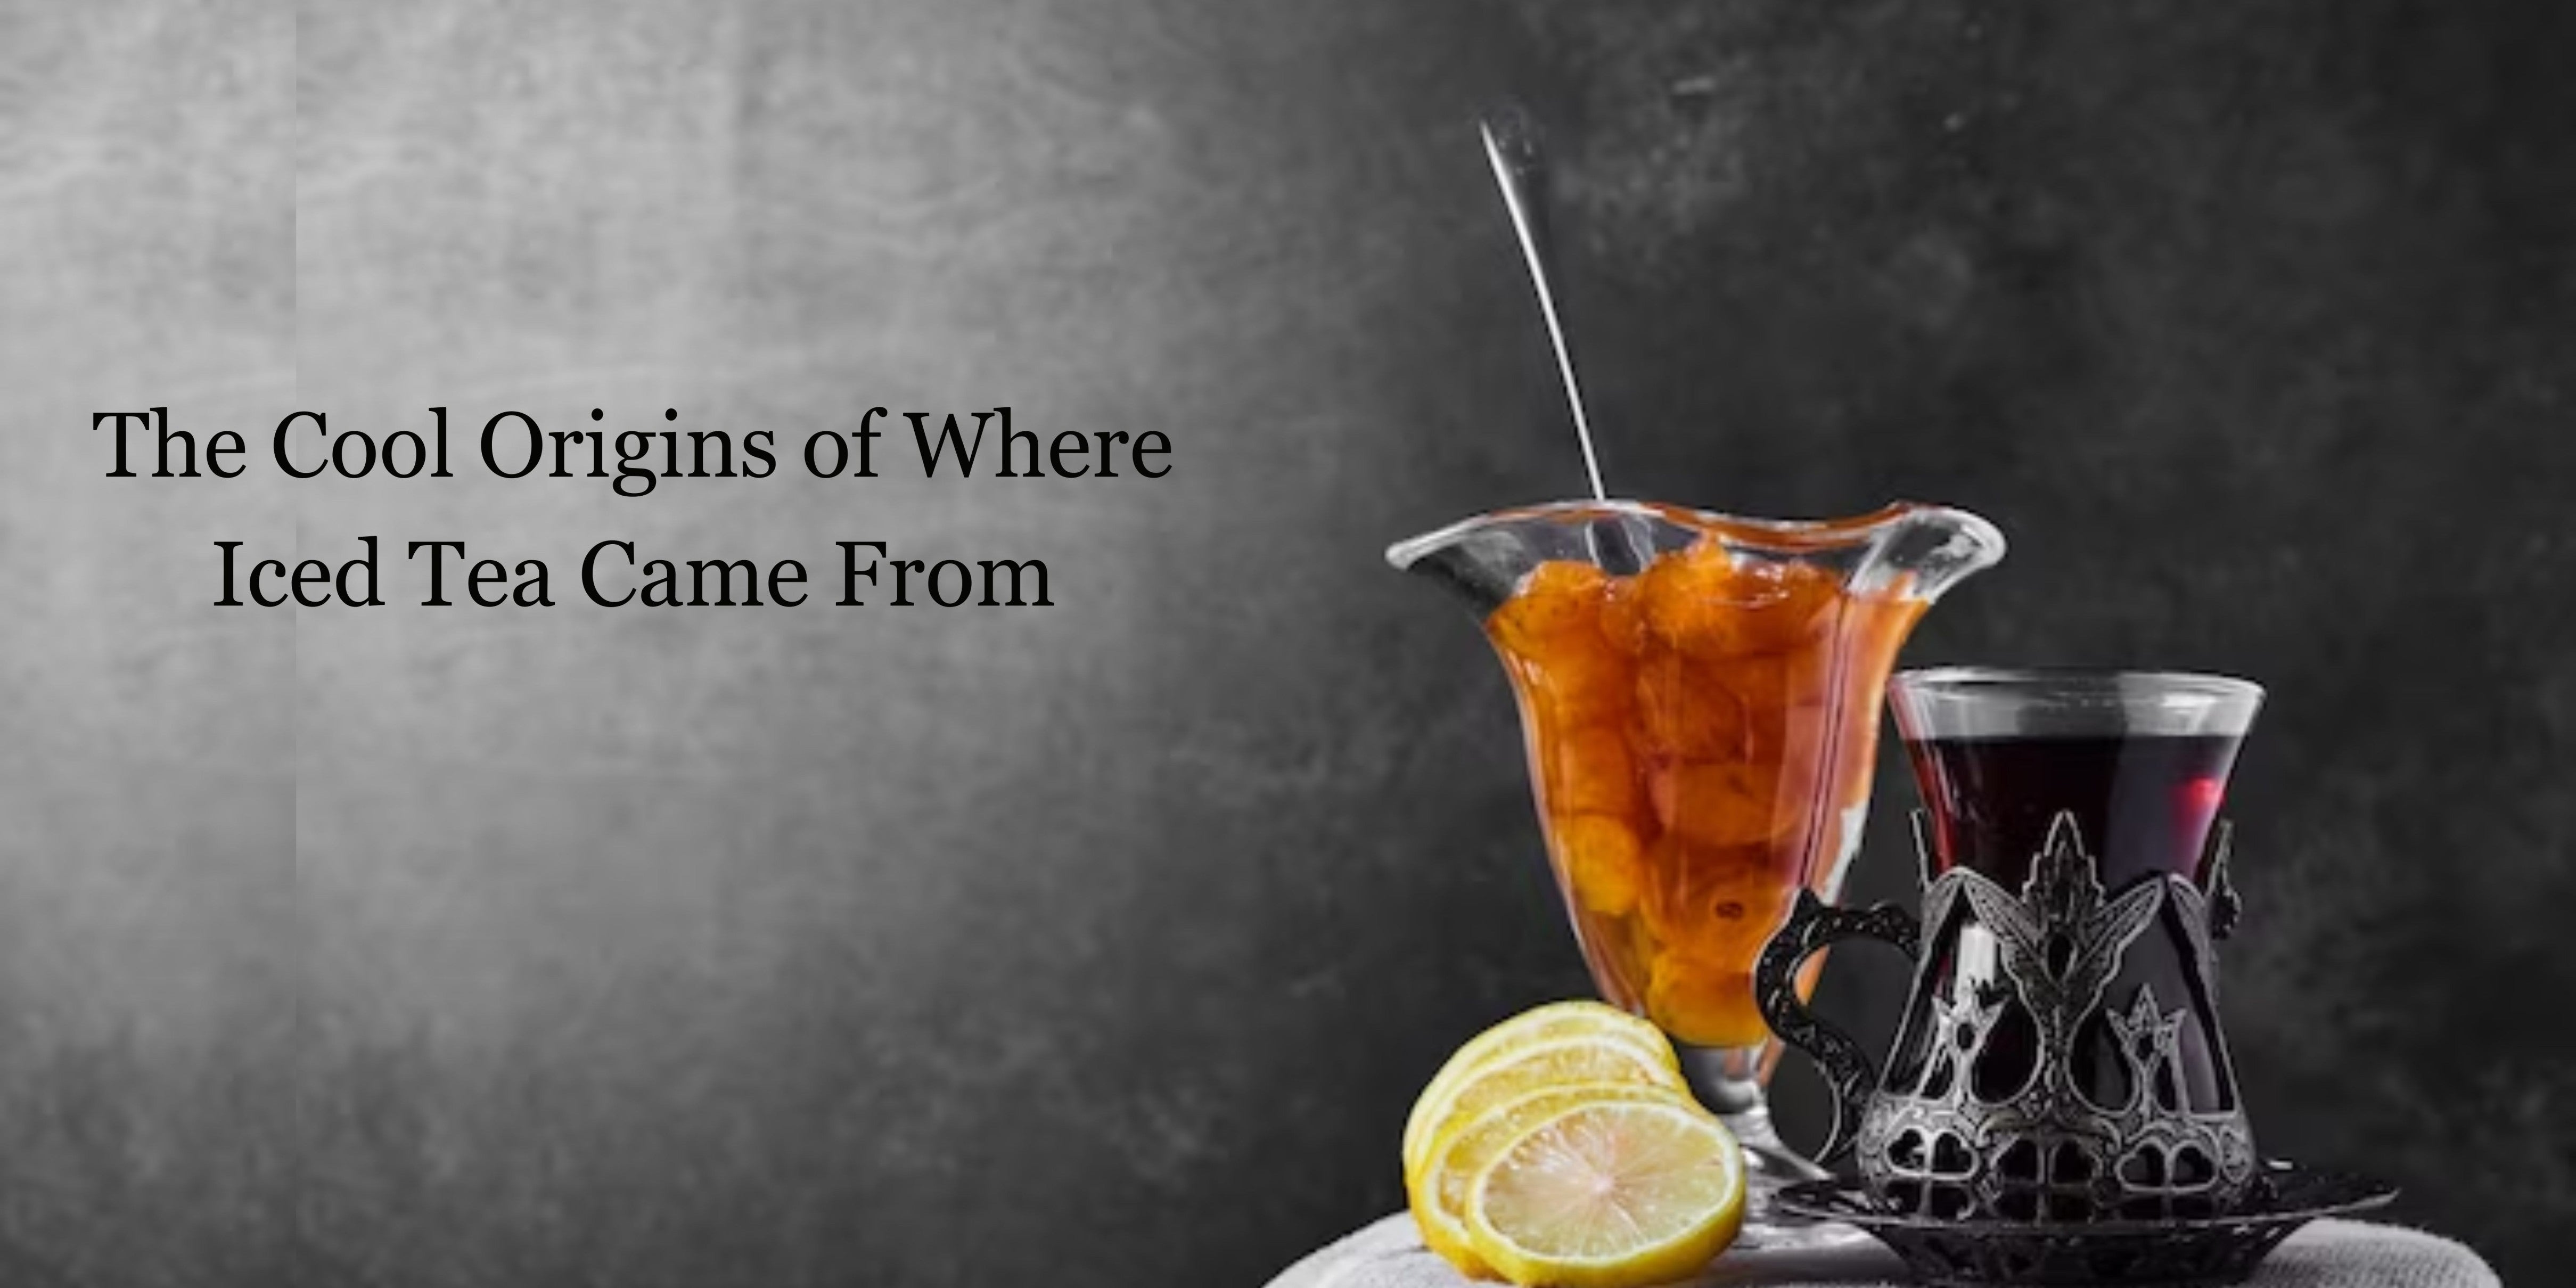 The Cool Origins of Where Iced Tea Came From